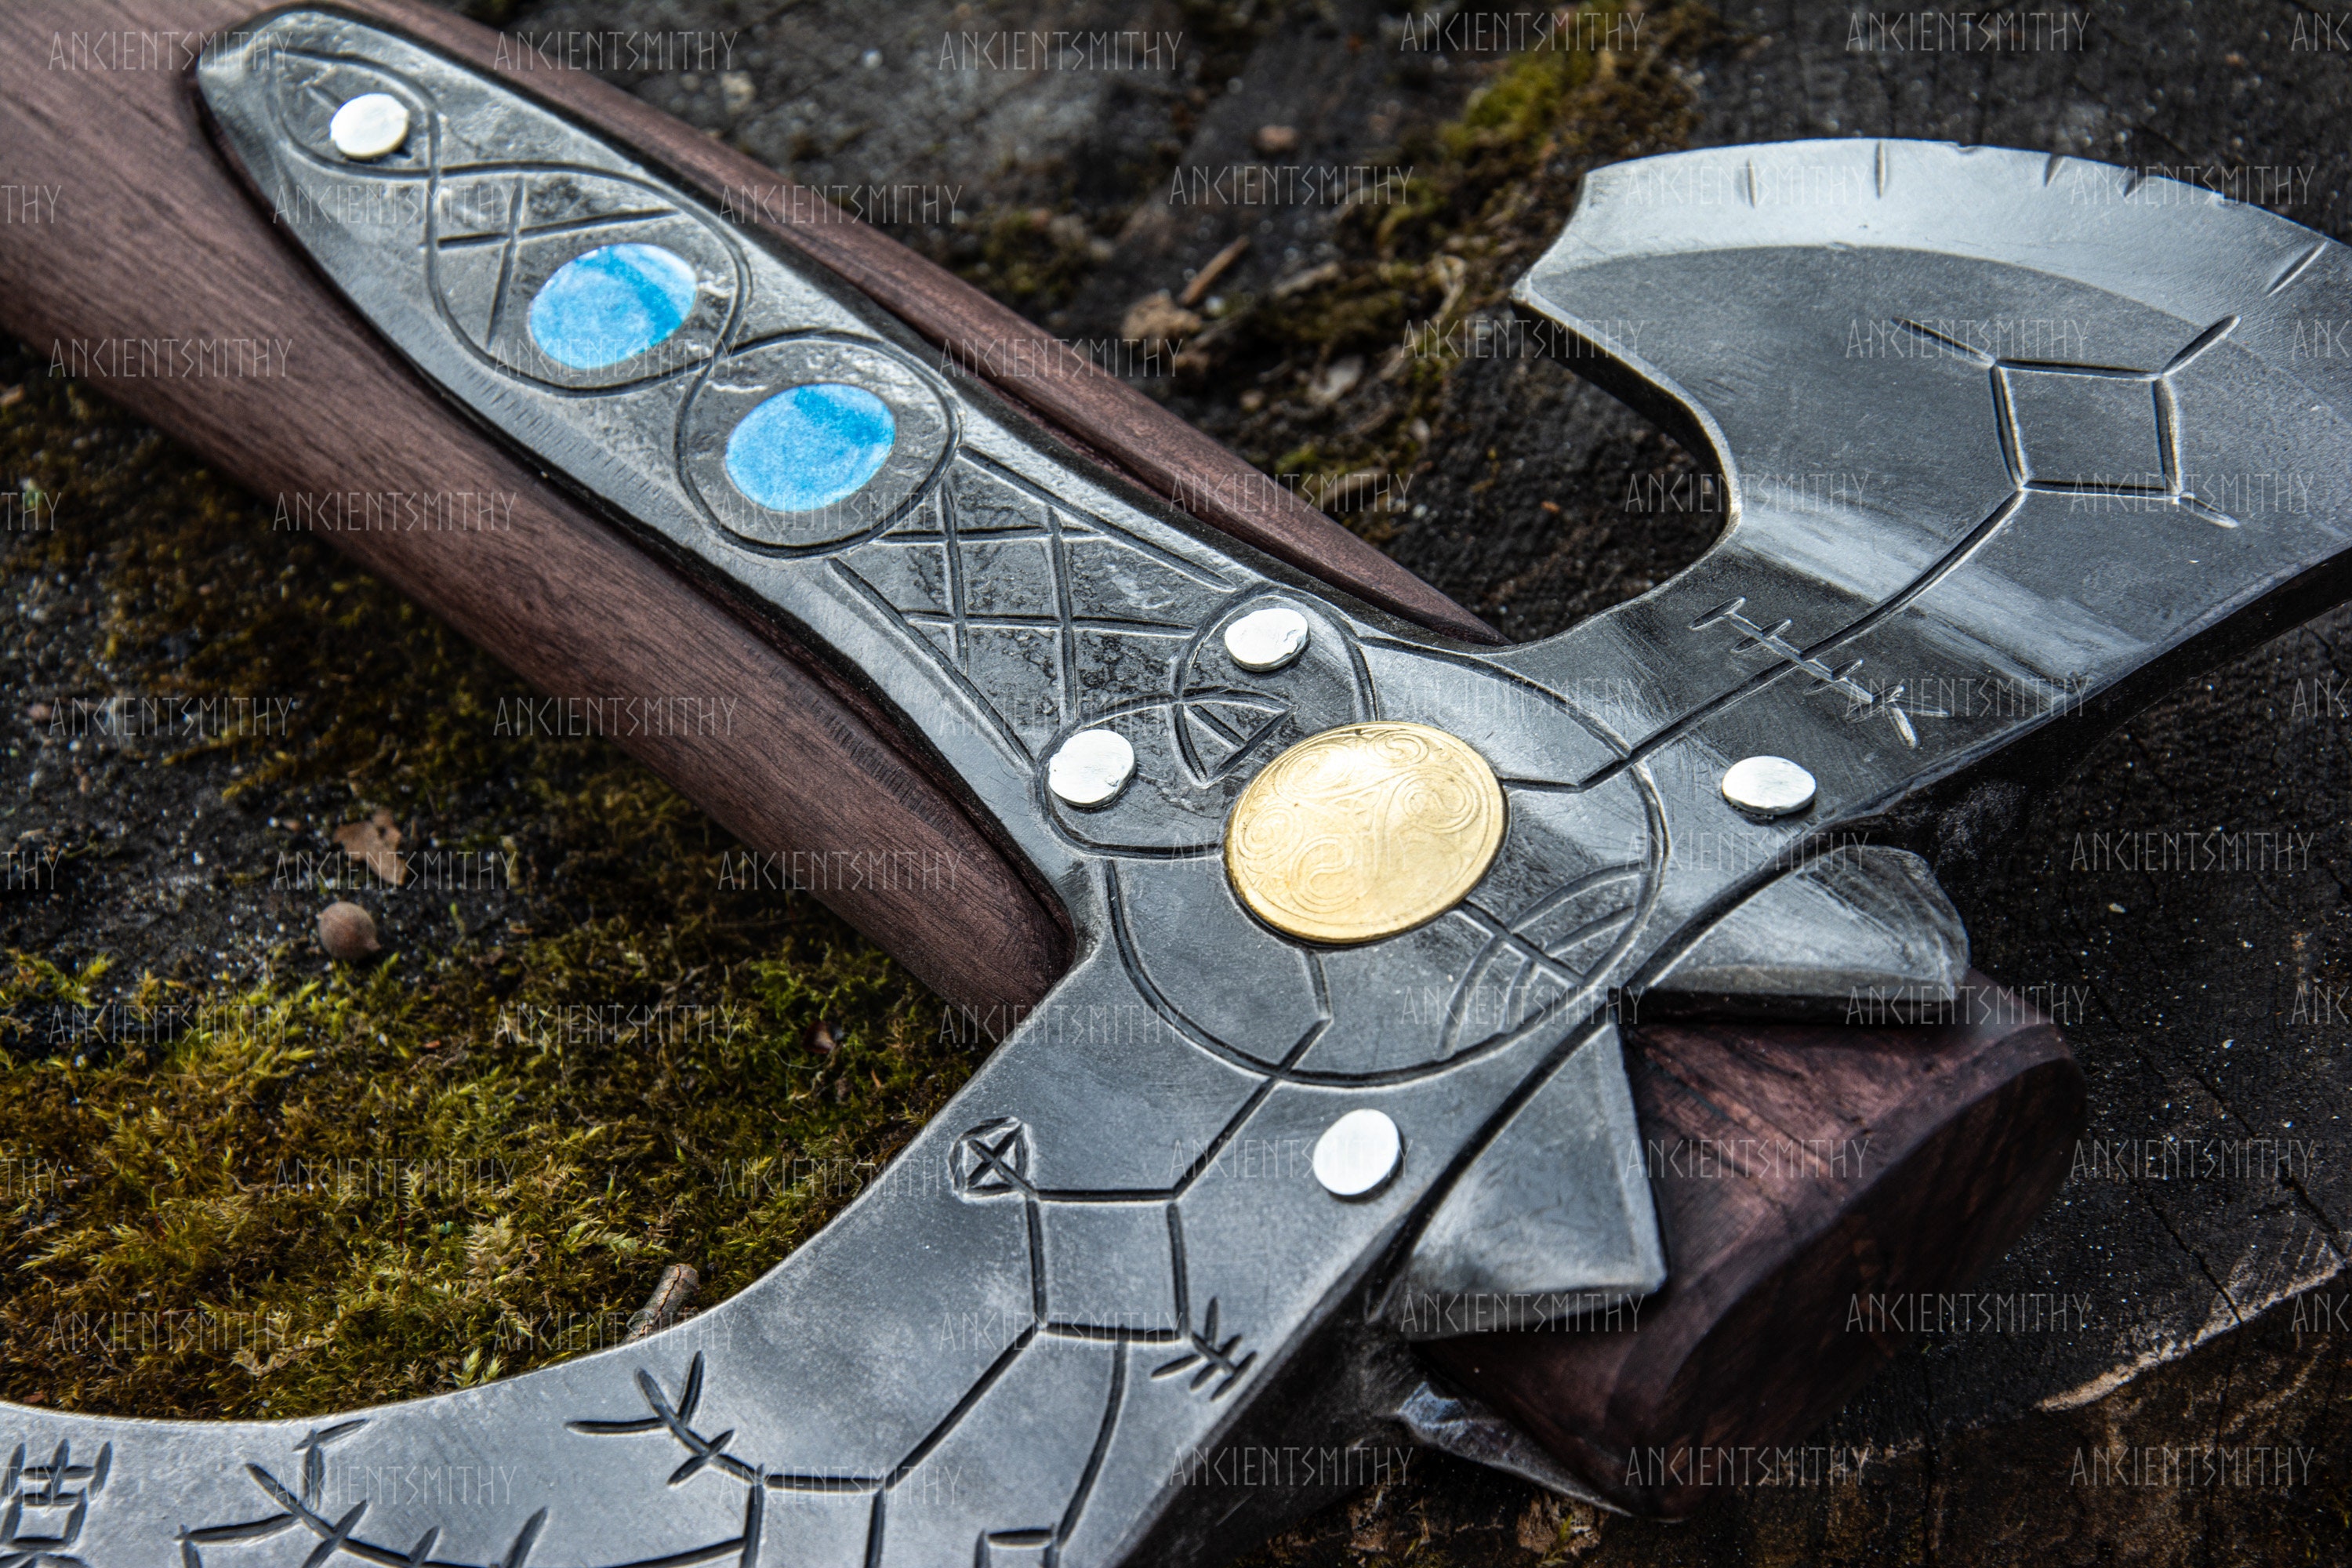 Kratos Axe With Handmade Carving Leviathan Felling Hatchet